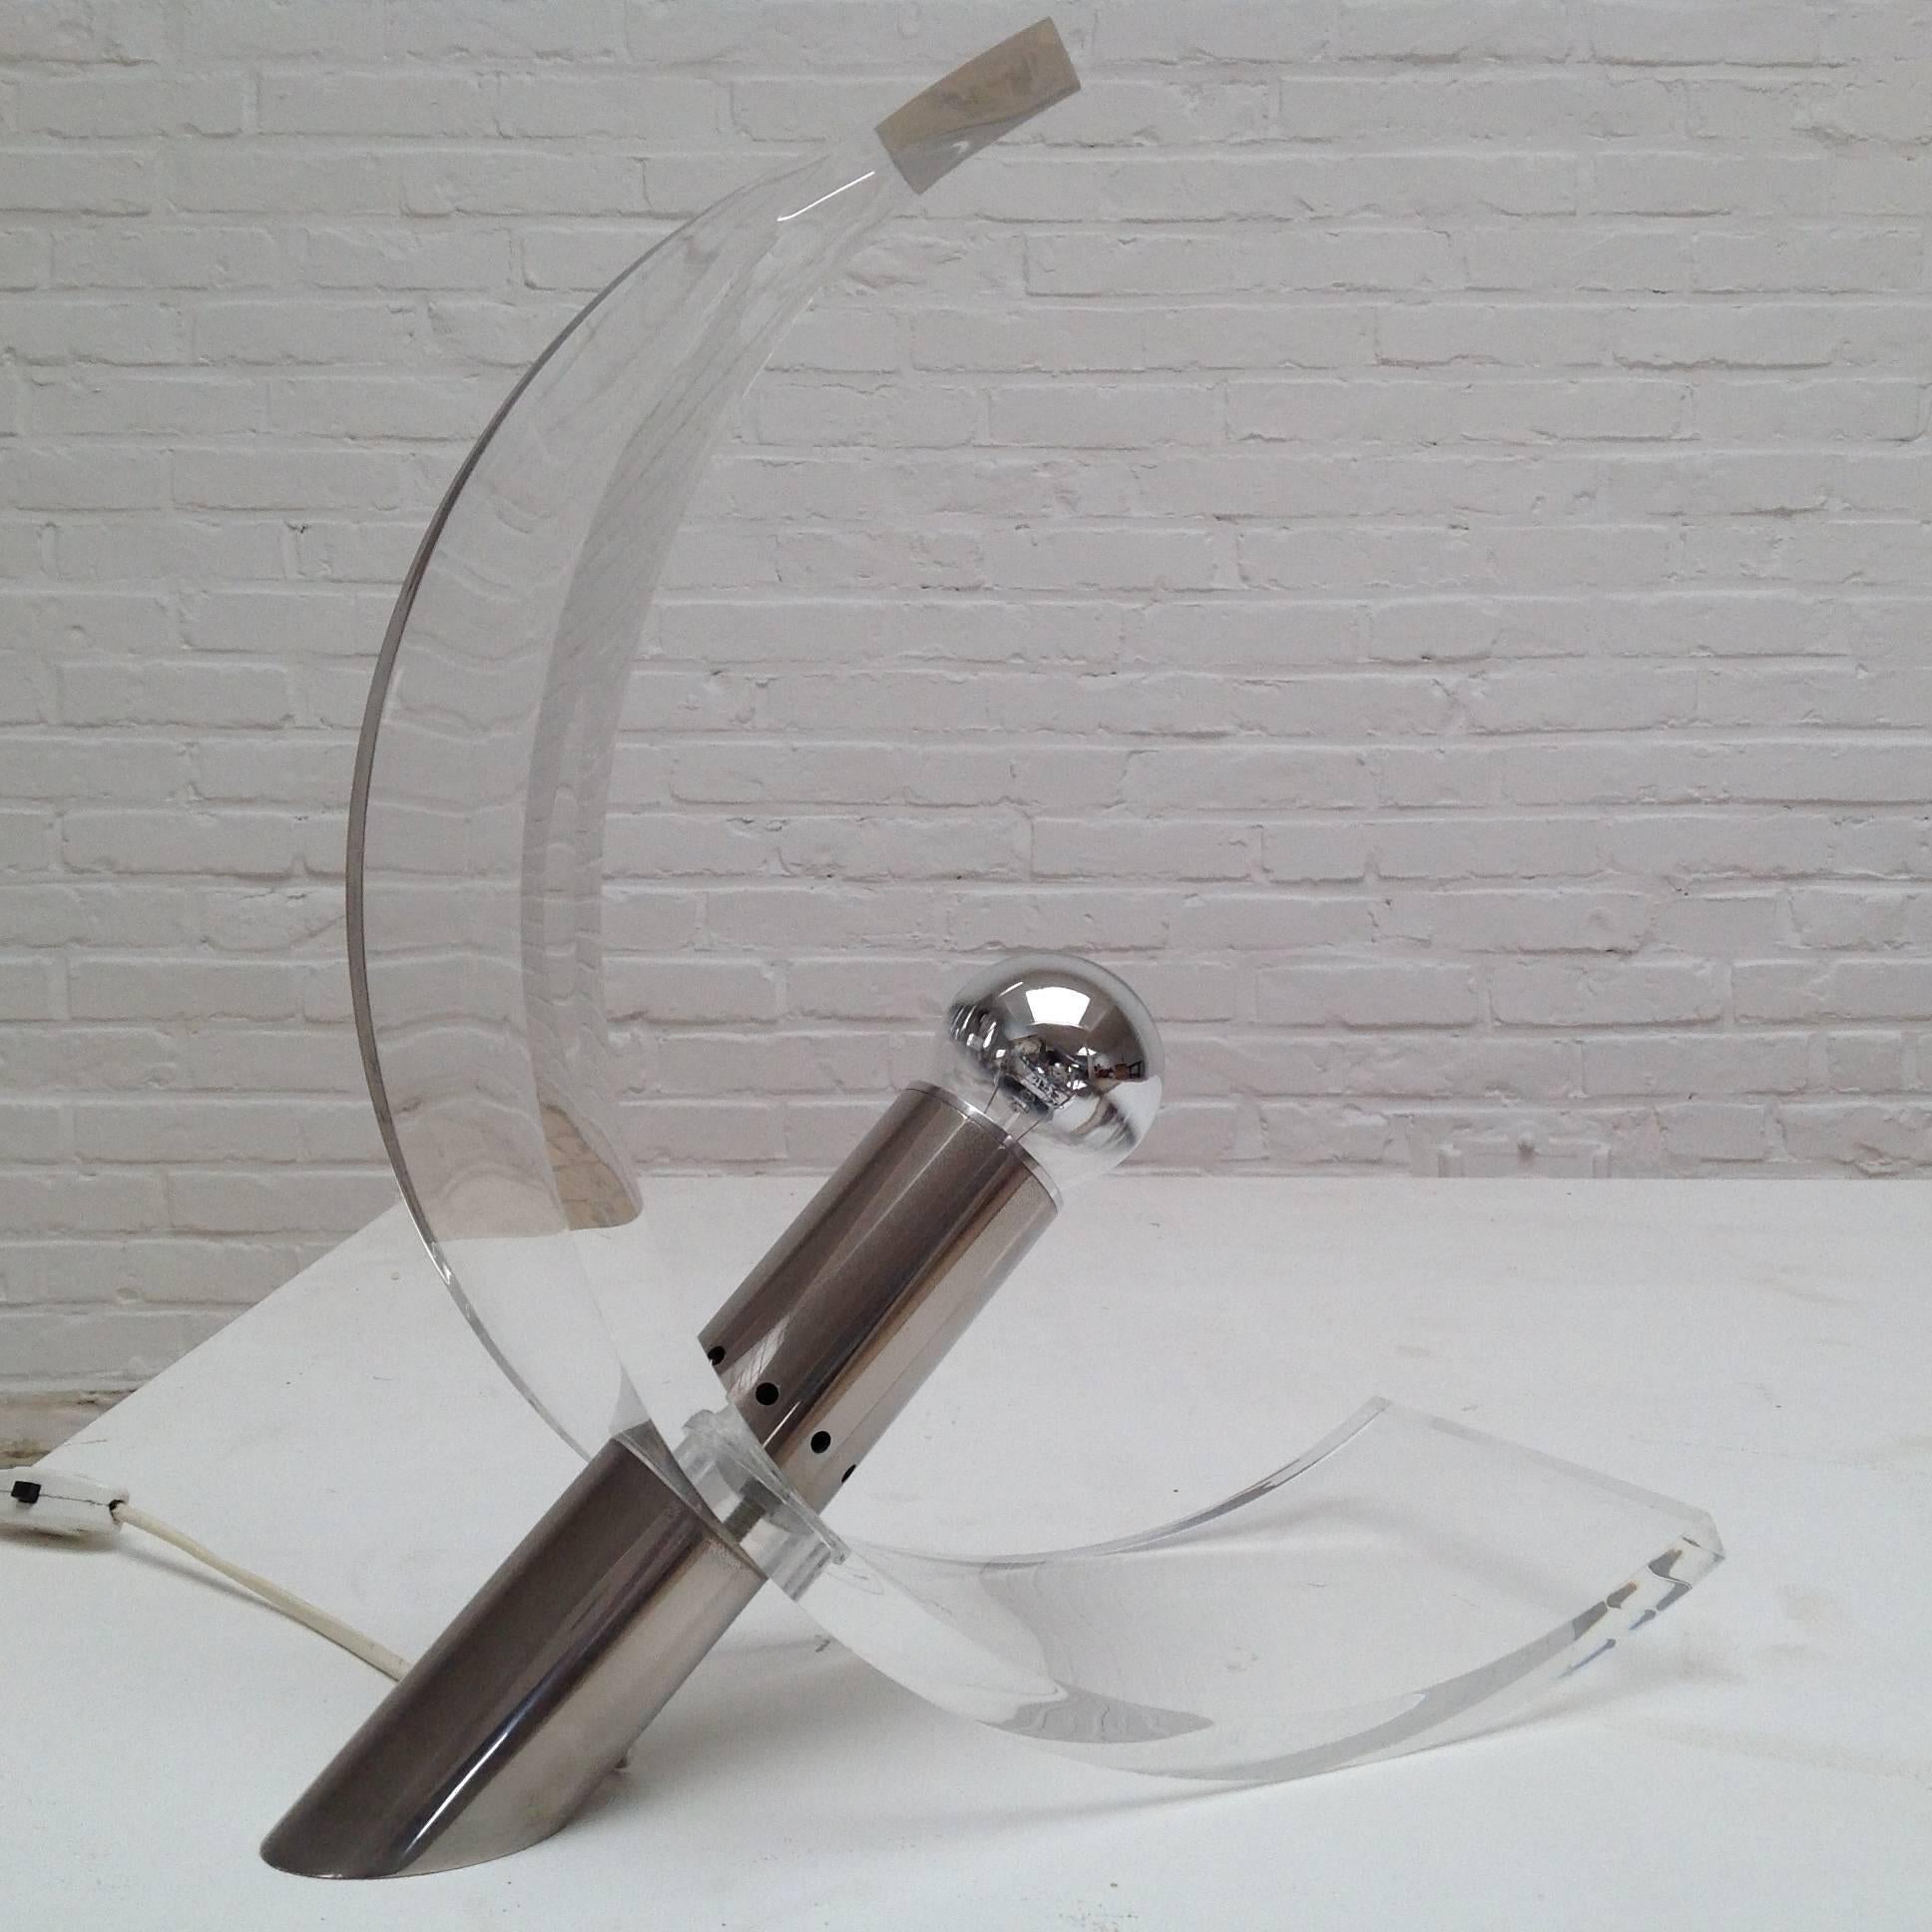 Rarely offered, this beautiful plexi desk lamp in very good condition, no words anymore, enjoy the pictures.
The wiring is completely checked and okay for the US, only one E27 large fitting.